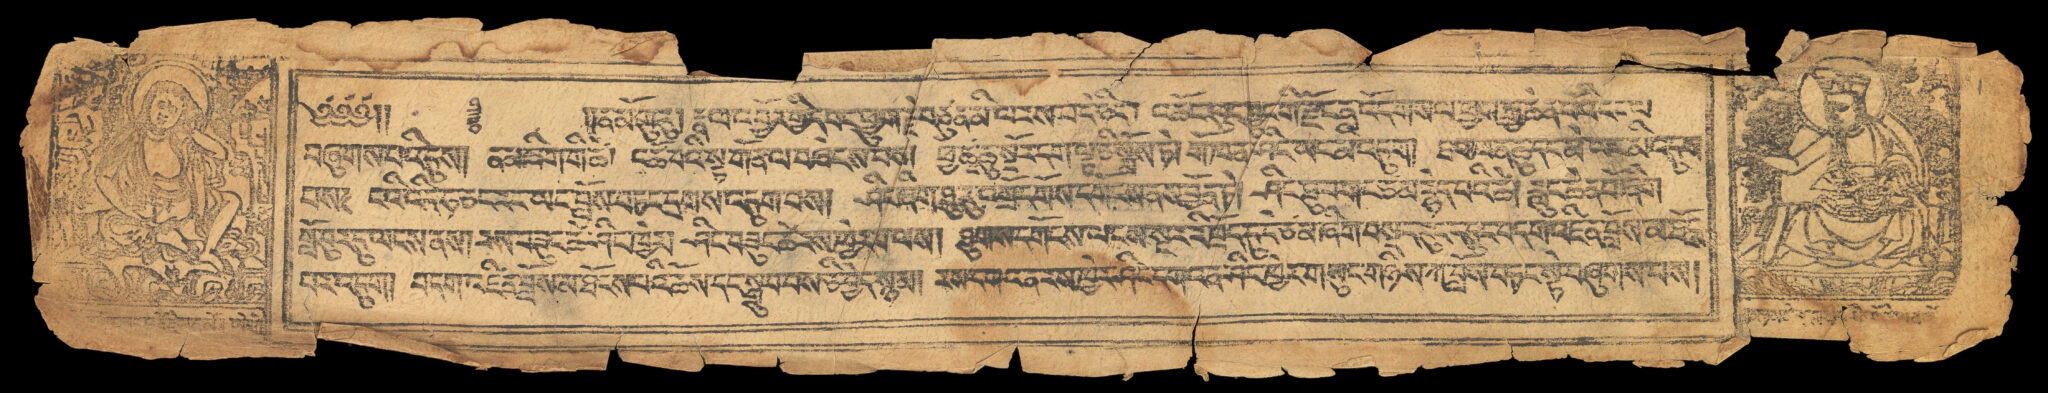 Rectangular tea-brown page featuring Tibetan text flanked by illuminations; edges of page frayed and worn